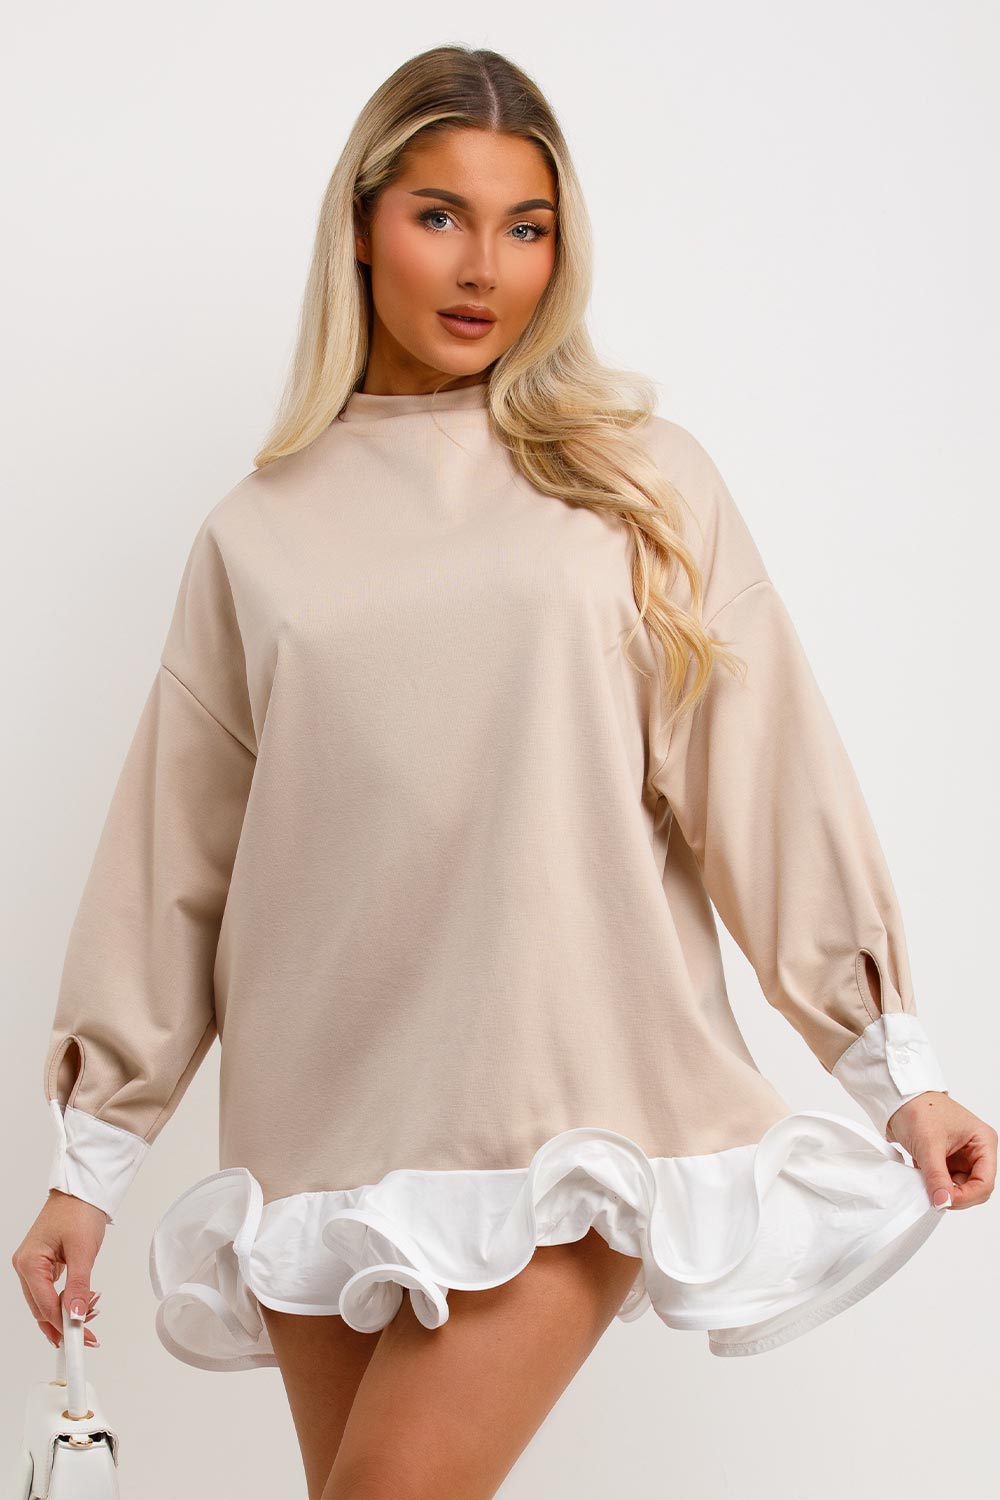 womens oversized sweatshirt with frill hem and long sleeves